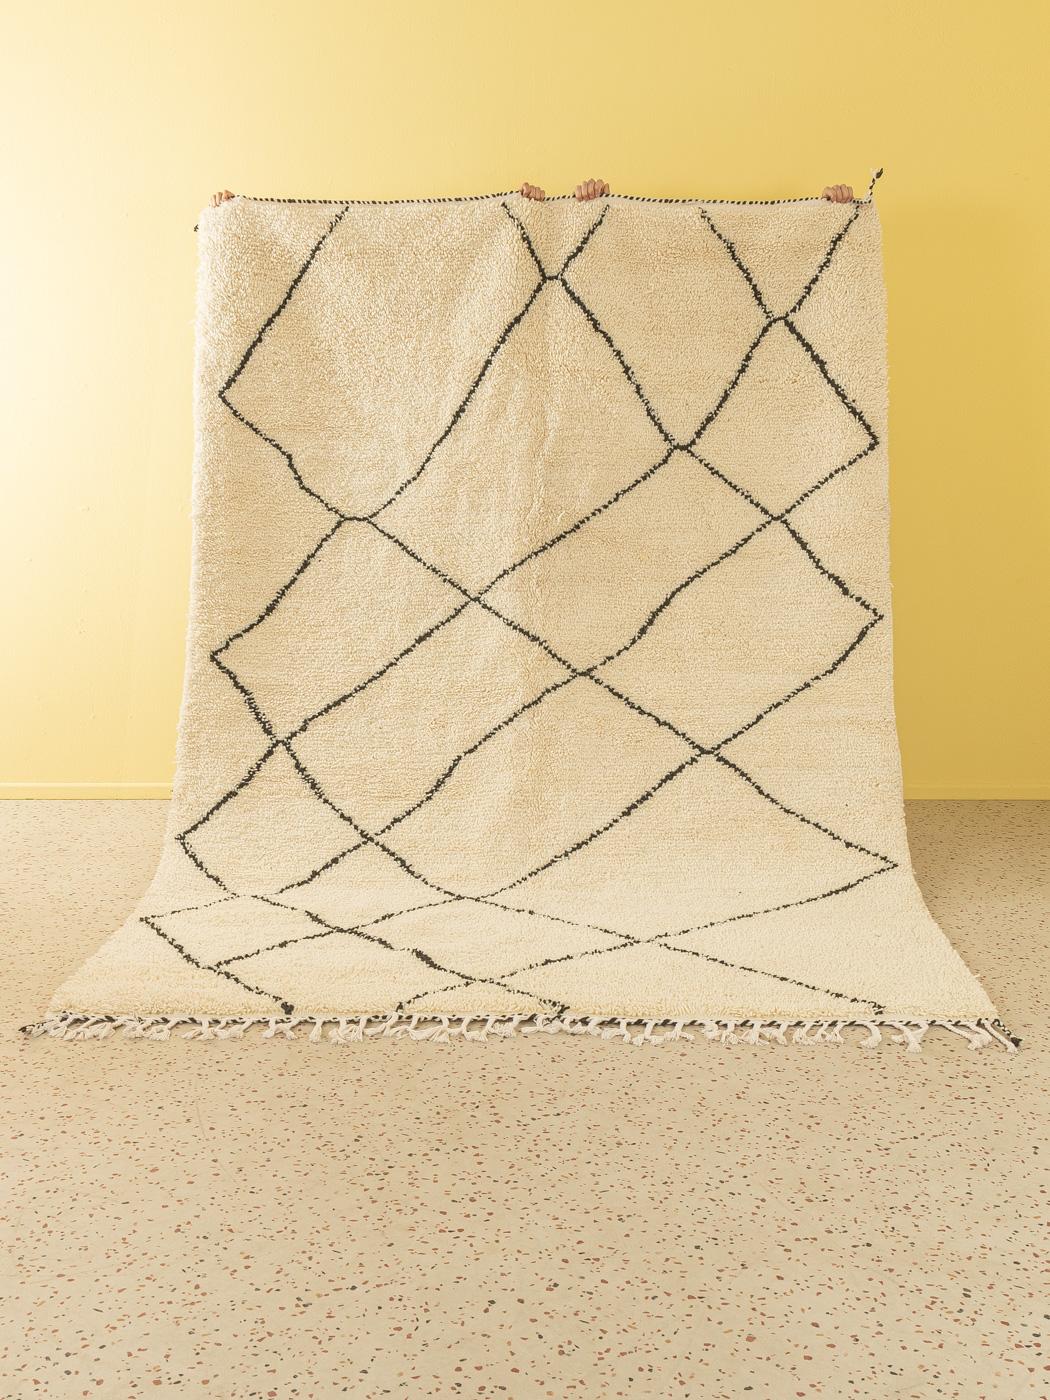 Home is a contemporary 100% wool rug – thick and soft, comfortable underfoot. Our Berber rugs are handwoven and handknotted by Amazigh women in the Atlas Mountains. These communities have been crafting rugs for thousands of years. One knot at a